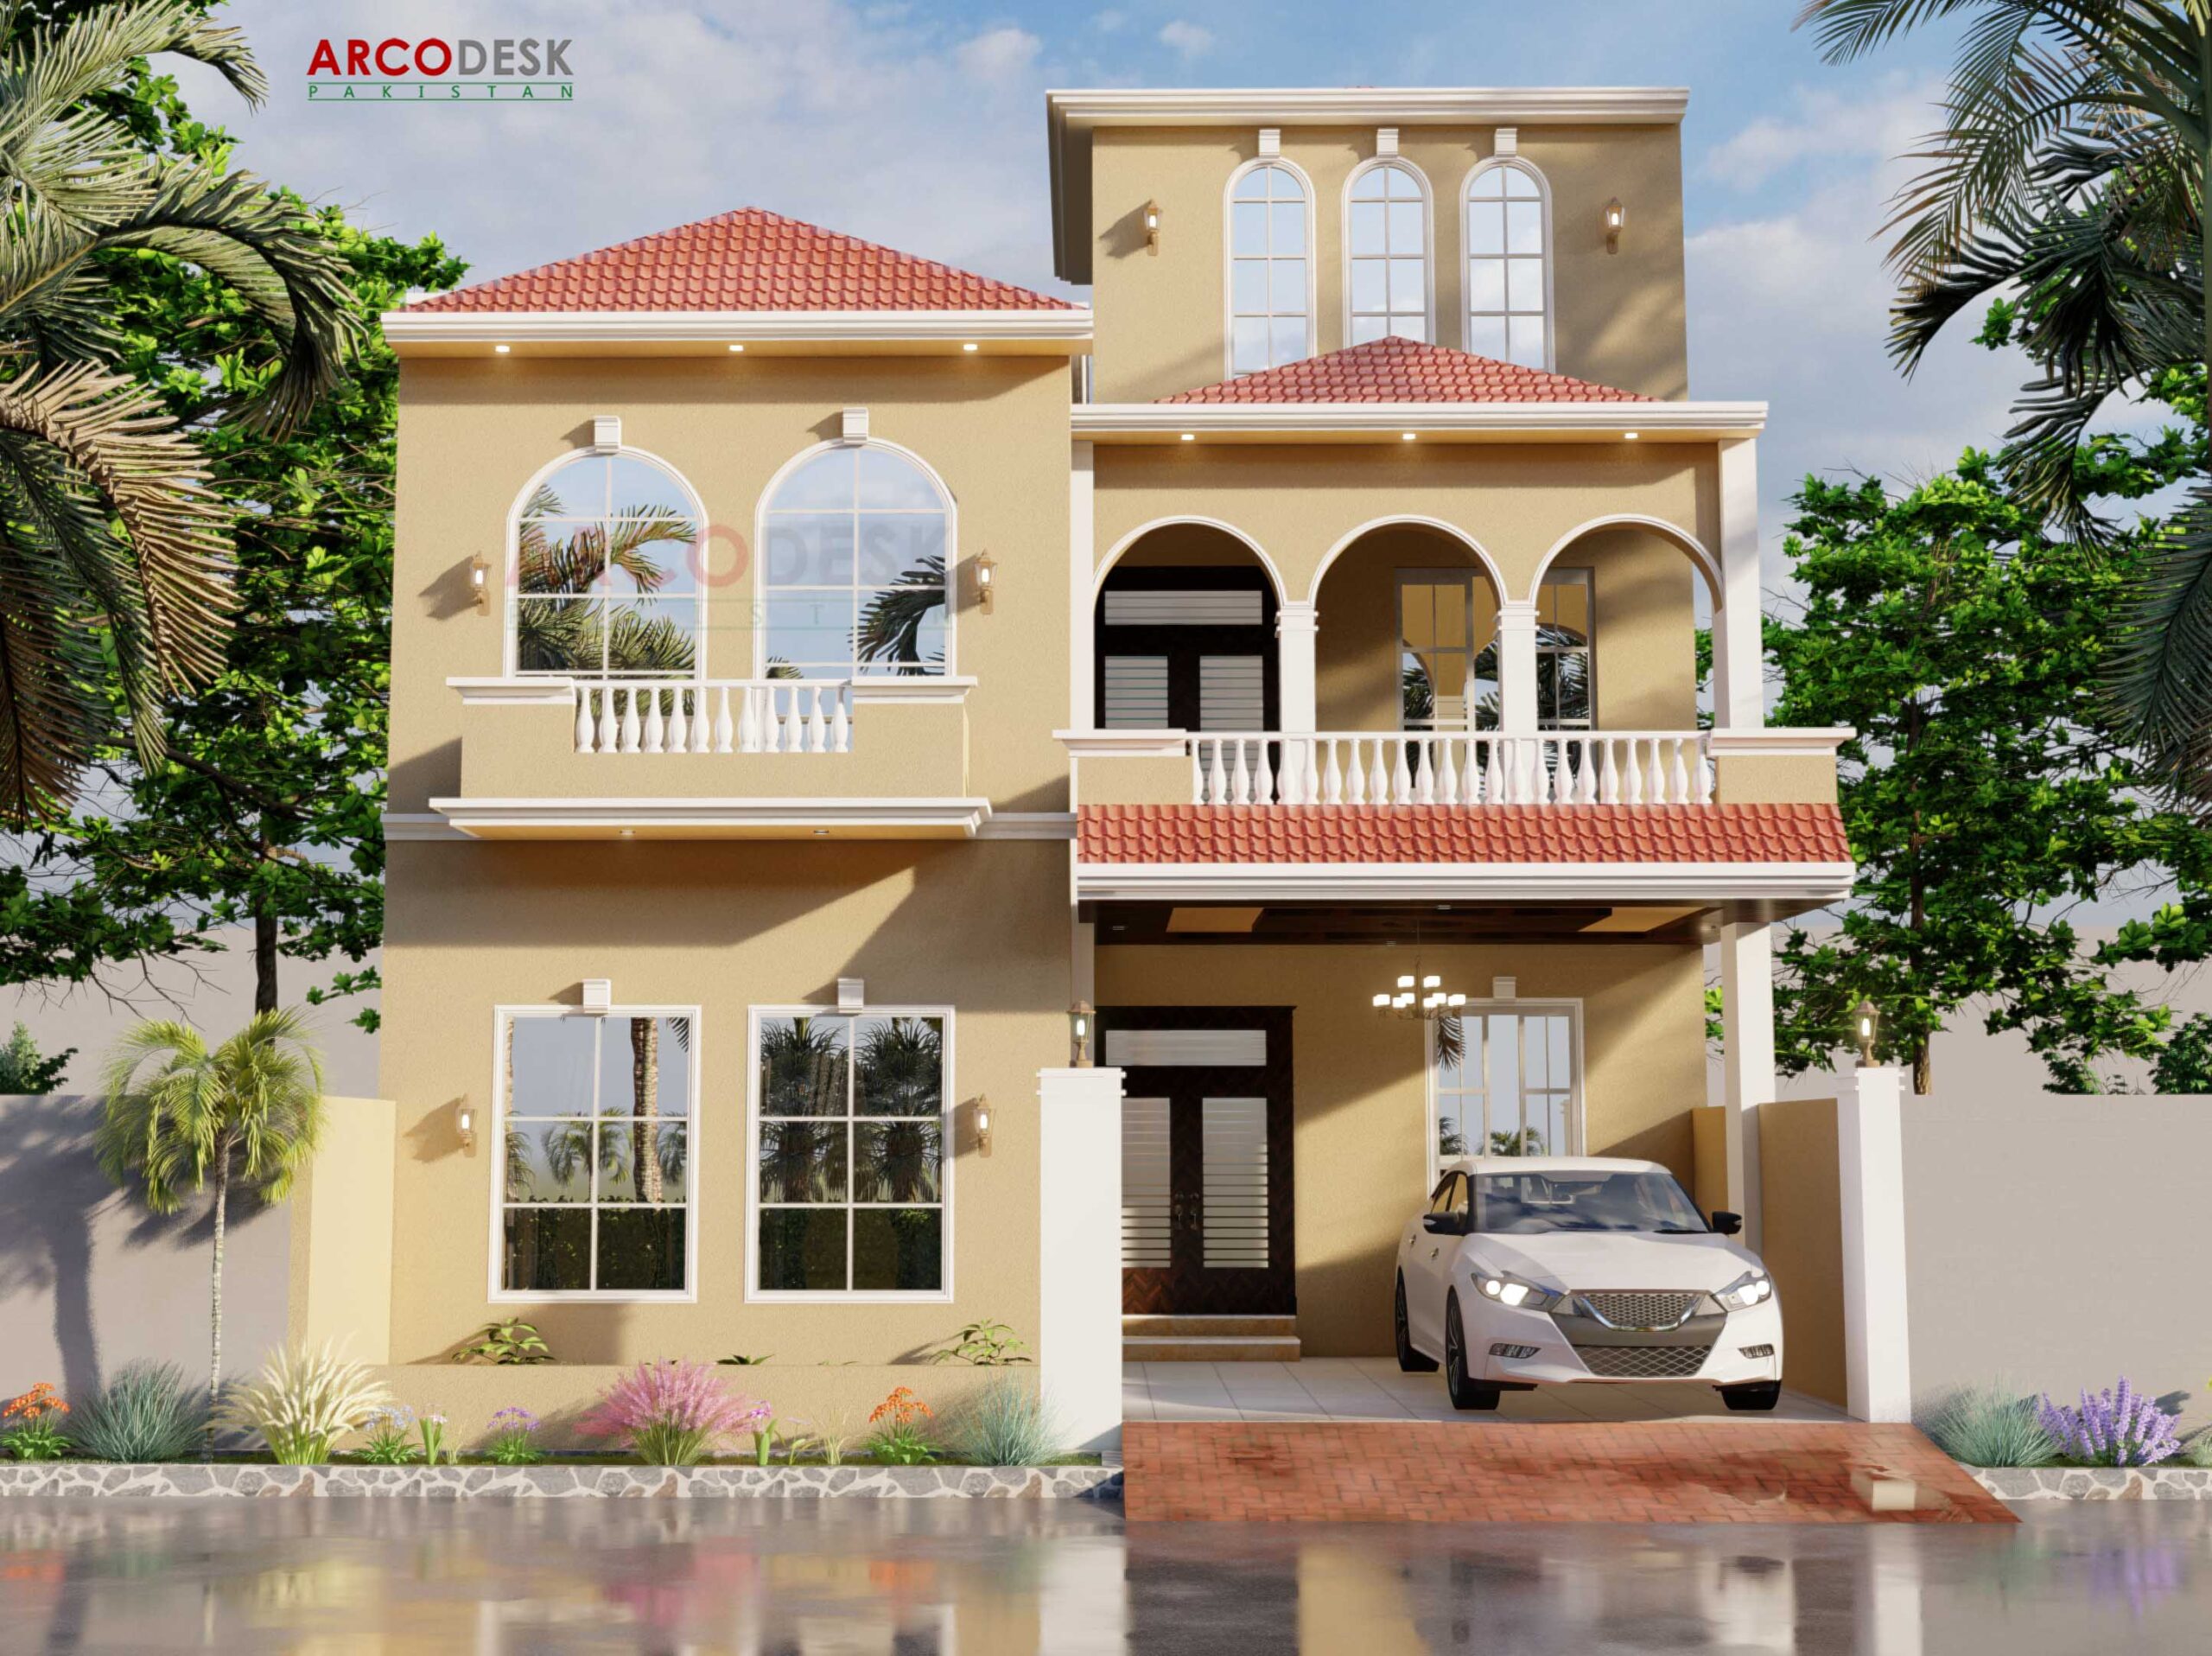 8 Marla Spanish House Elevation Design In G13 Islmabad